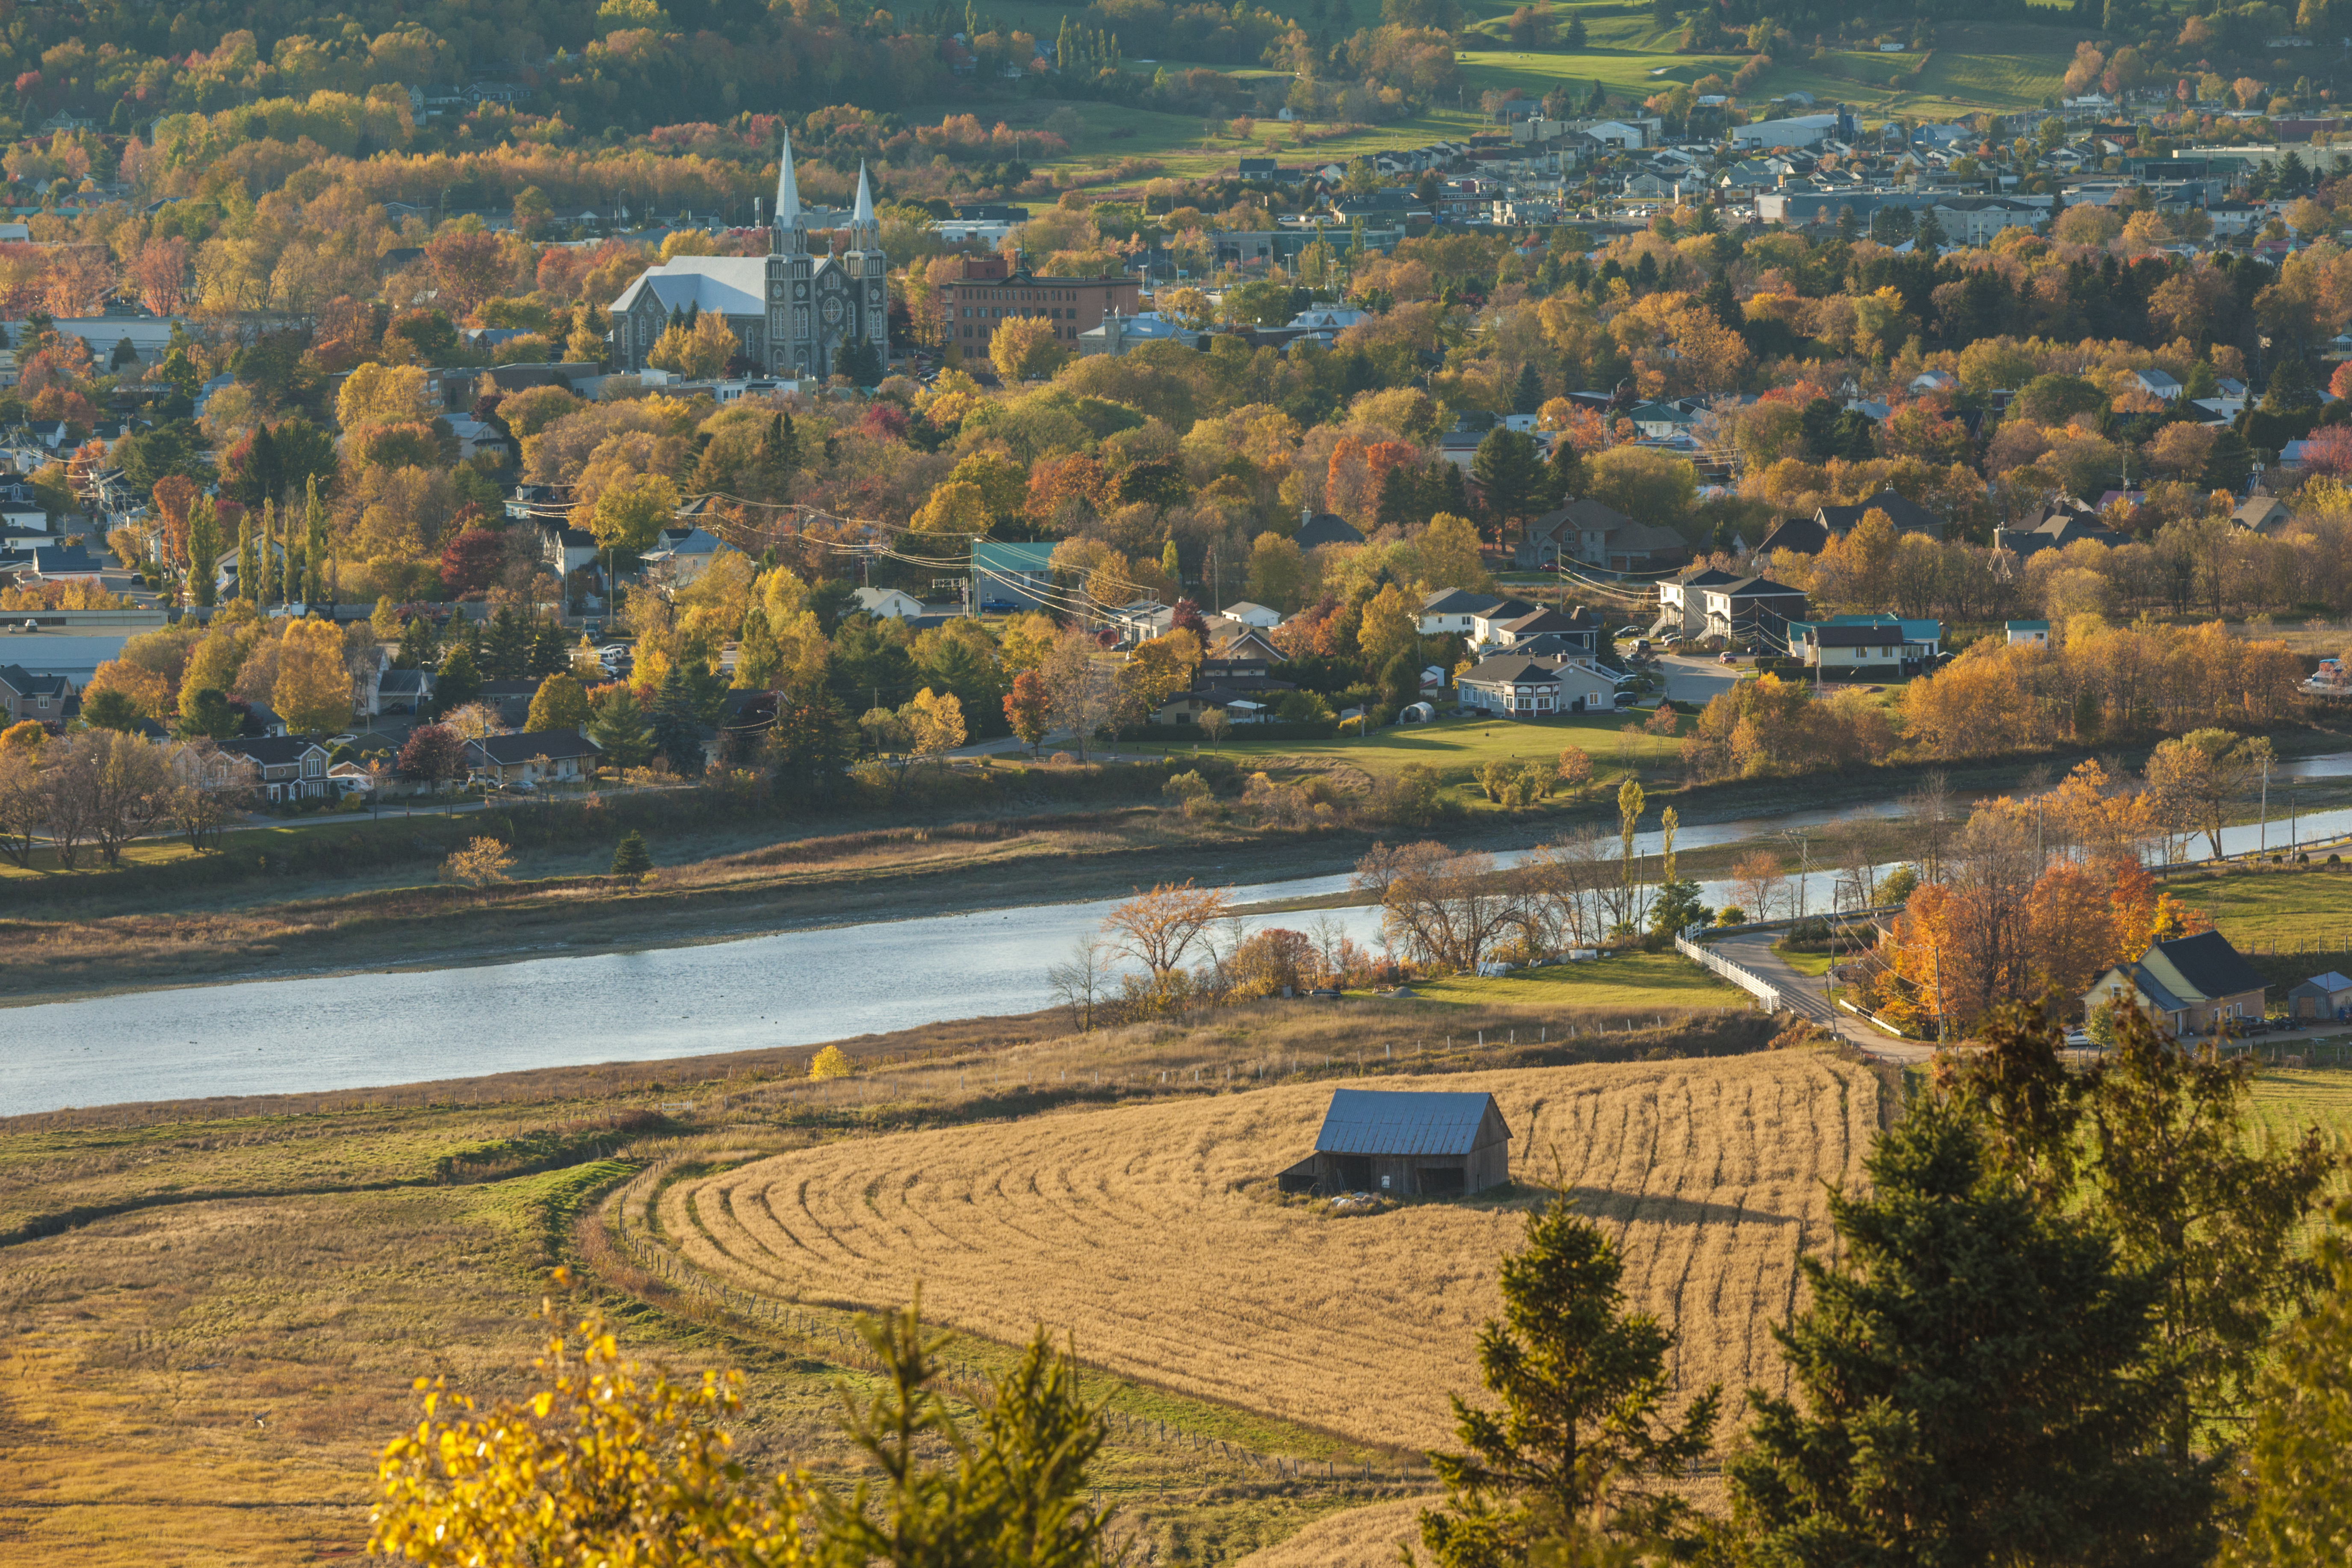 elevated view of farm land and small town with church steeple in the background.